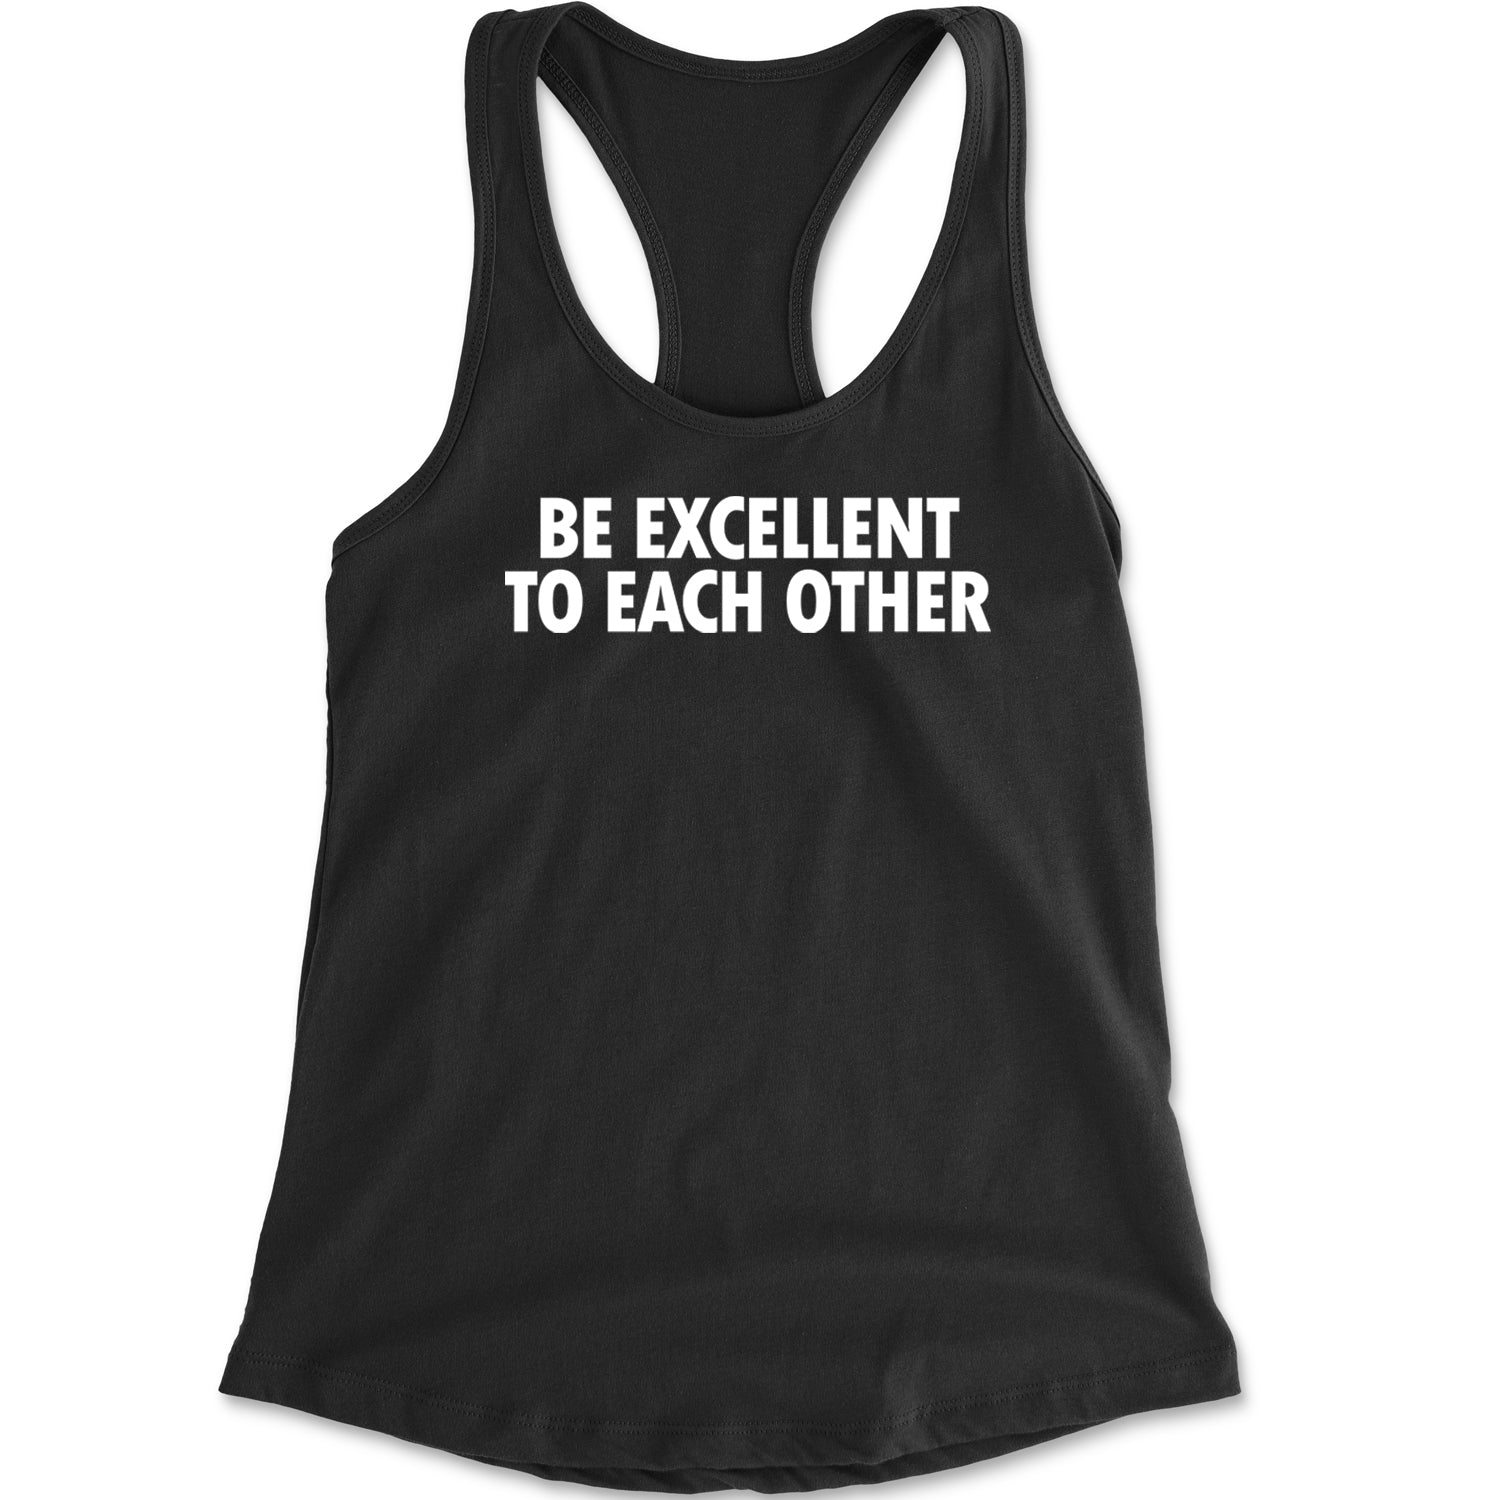 Be Excellent To Each Other Racerback Tank Top for Women